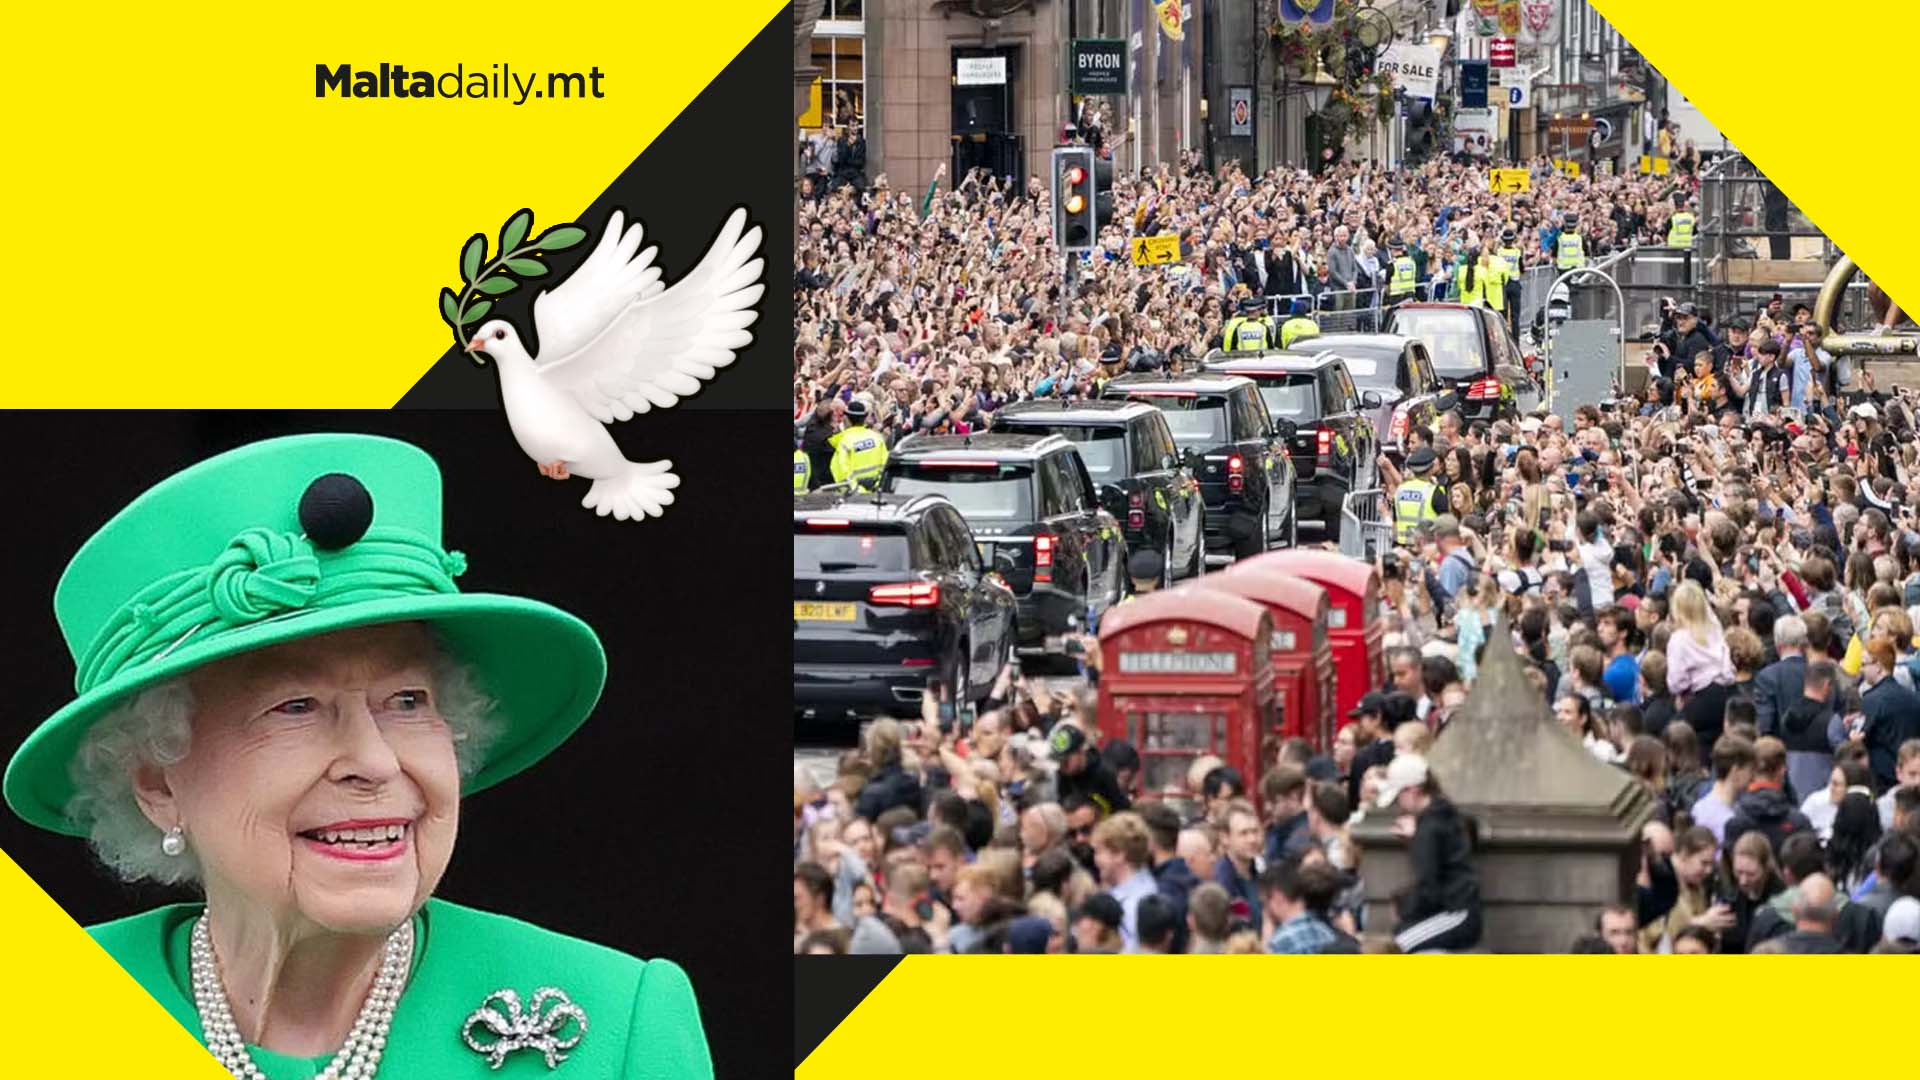 Around mile-long queue of 20,000 people to see Queen lying at rest